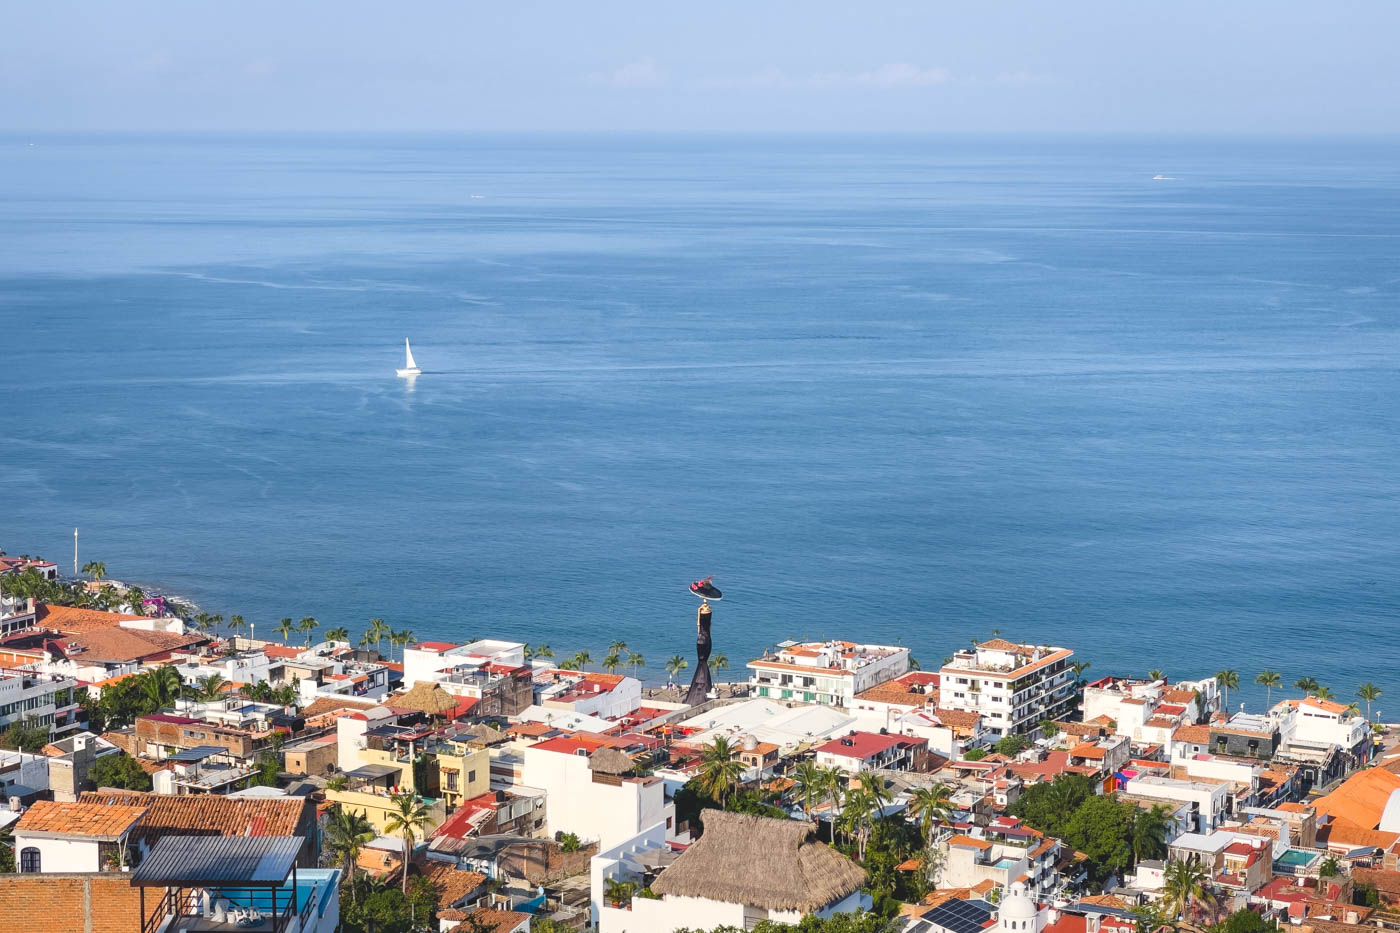 A view over the tallest Catrina statue in all of Mexico in between the buildings of Puerto Vallarta beside the ocean.